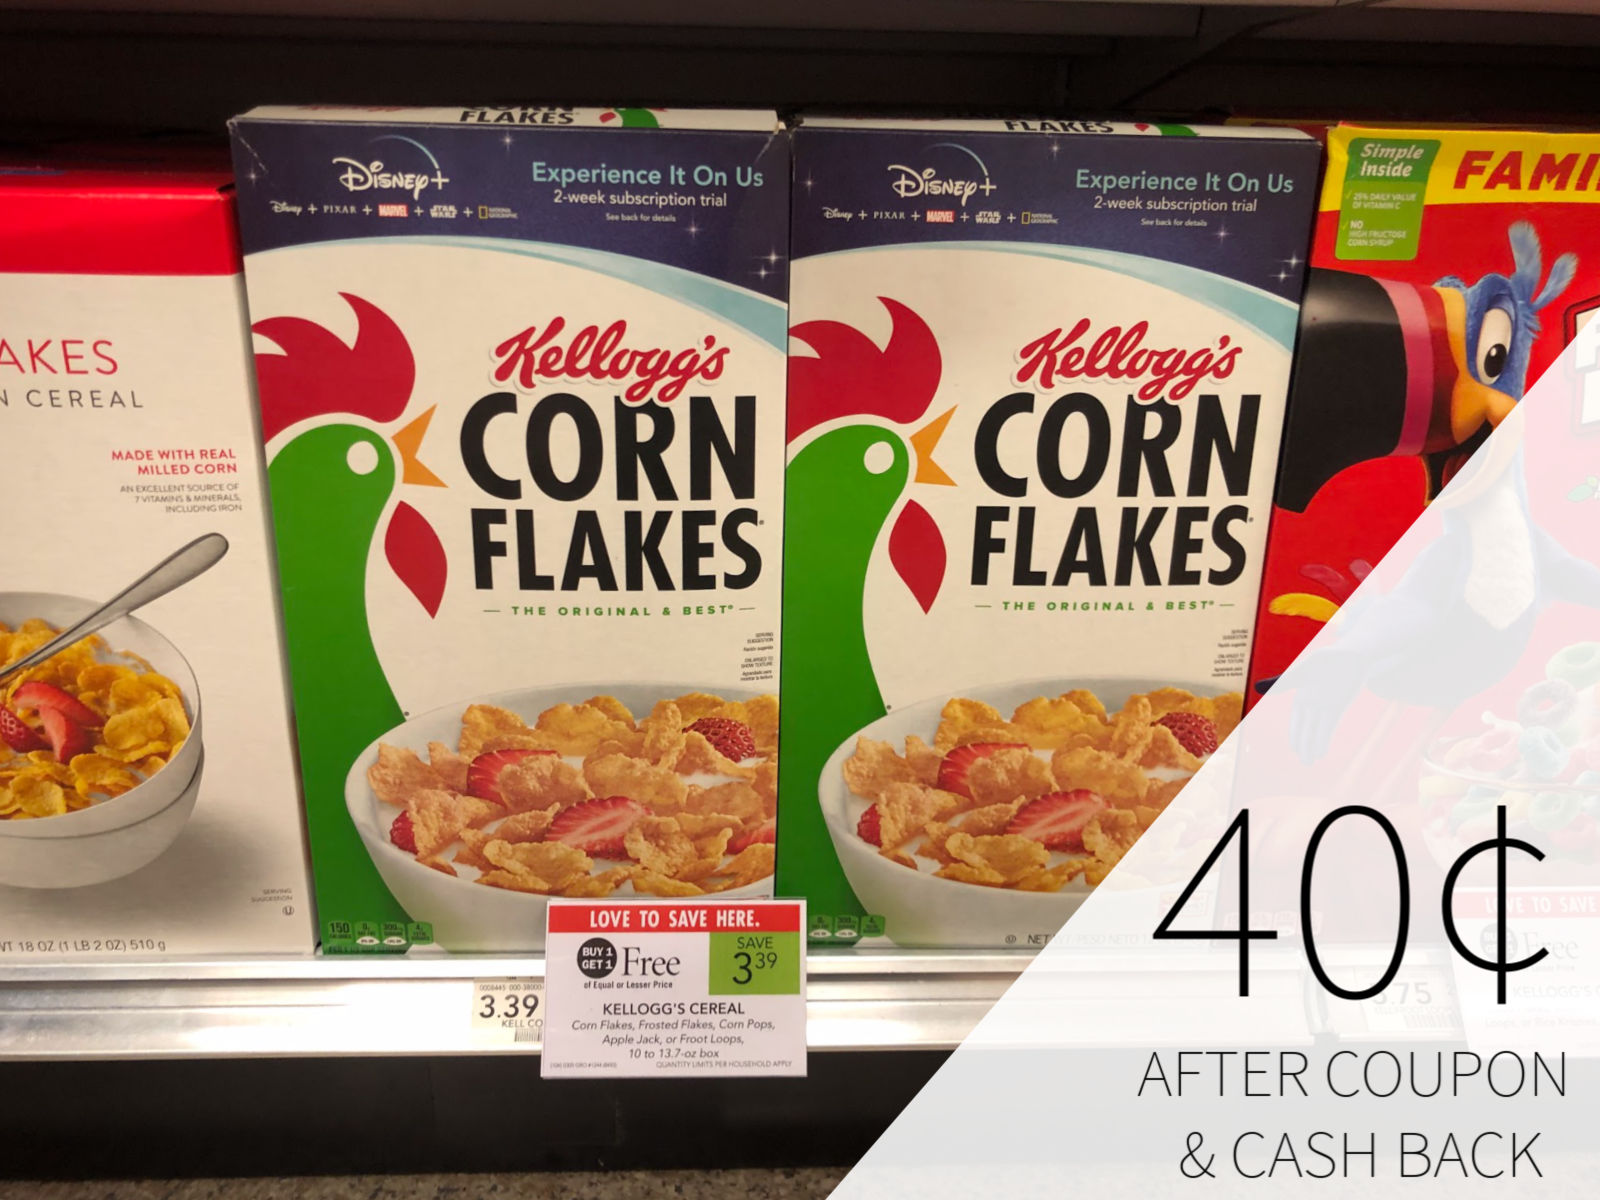 Still Time To Grab A Deal – All Kellogg’s Cereals Are BOGO At Publix!